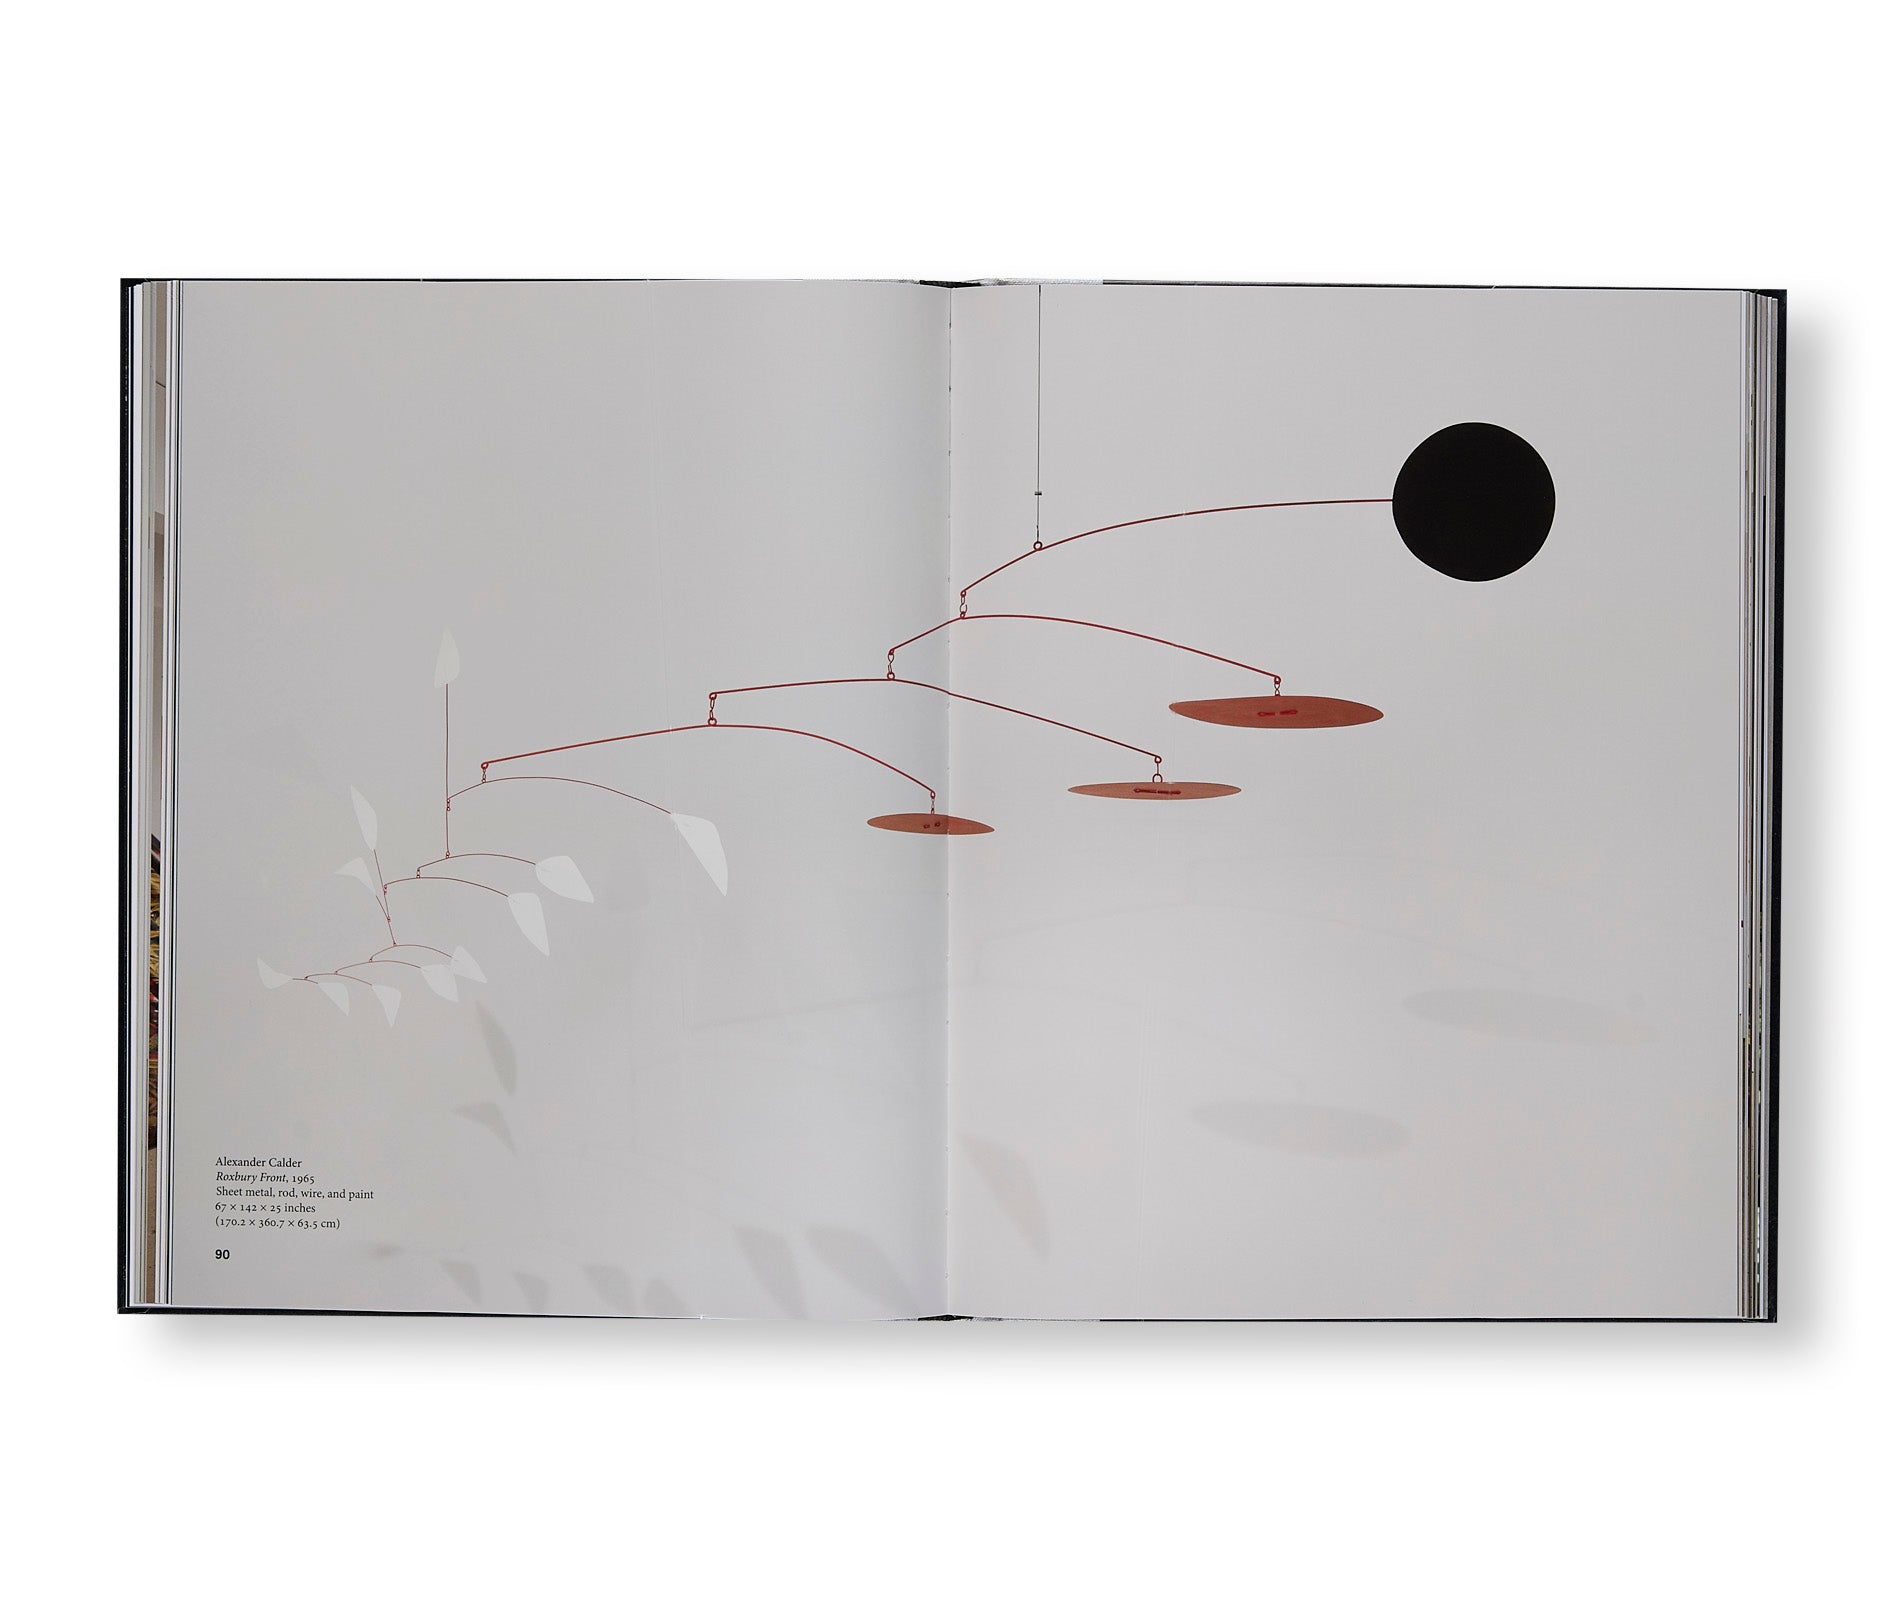 EVERY KIND OF WIND, CALDER AND THE 21ST CENTURY by Alexander Calder